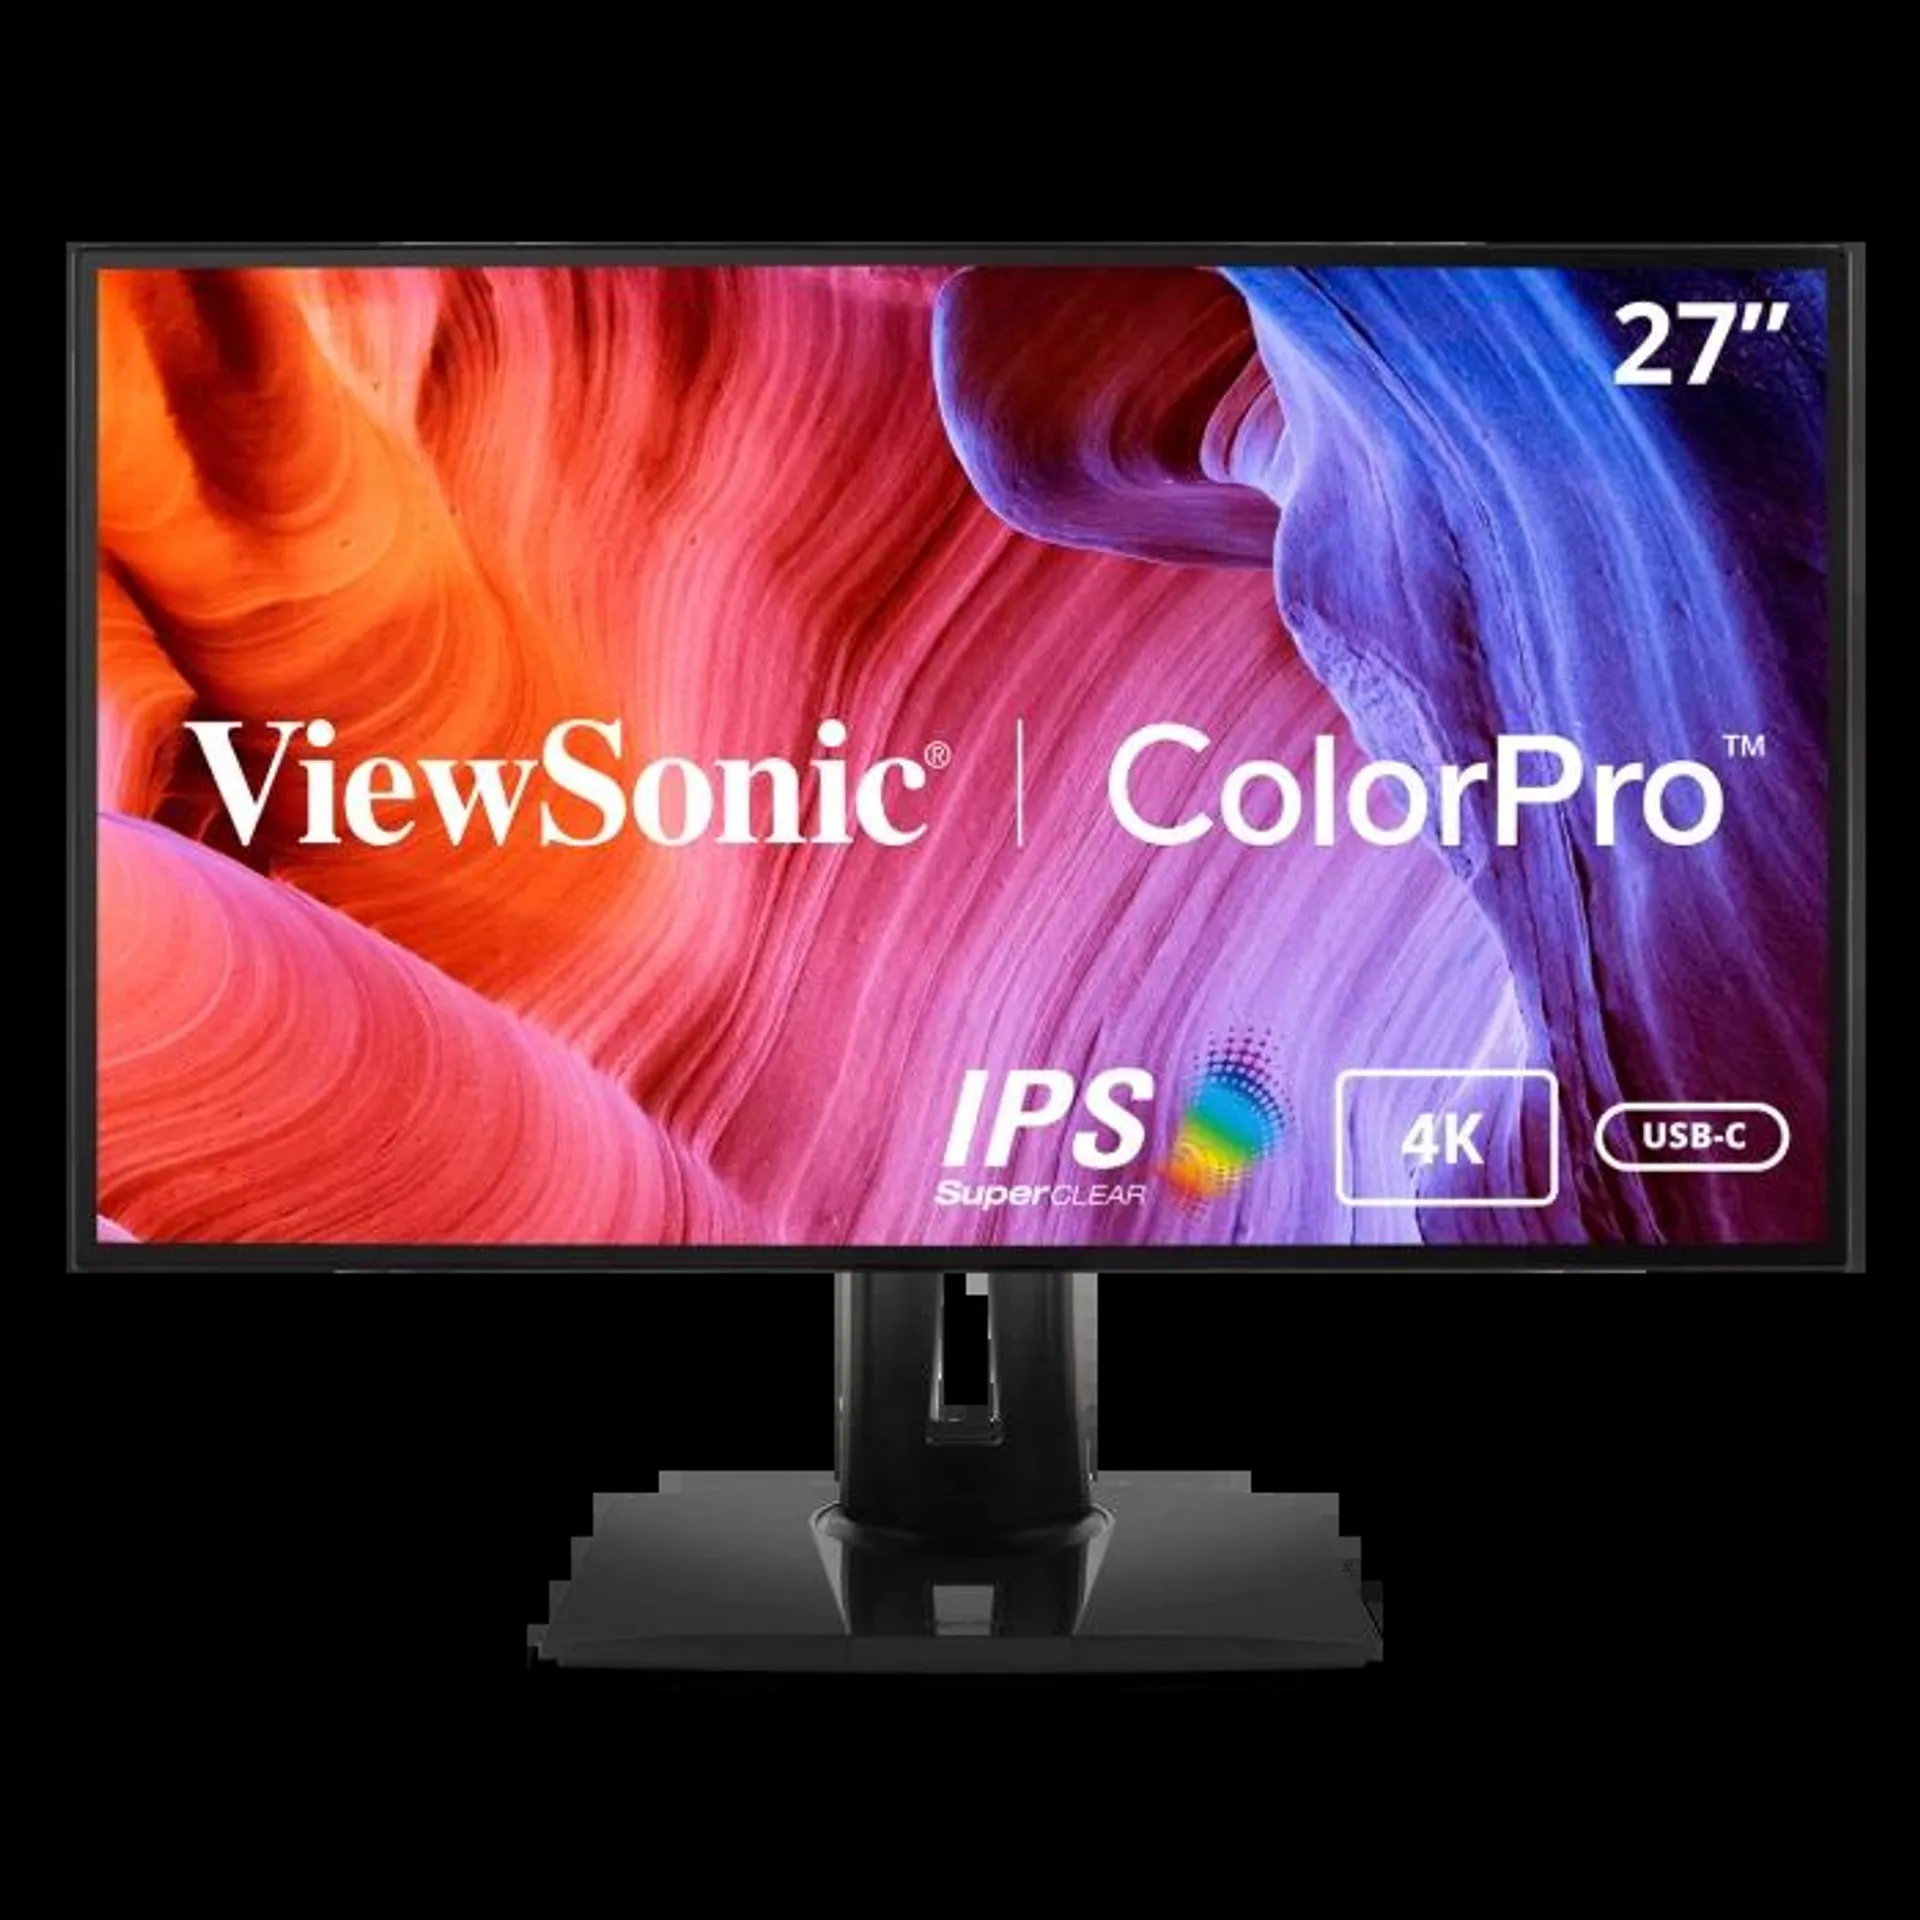 VP2768a-4K - 27" ColorPro™ 4K UHD IPS Monitor with 90W USB C, RJ45, sRGB and HDR10